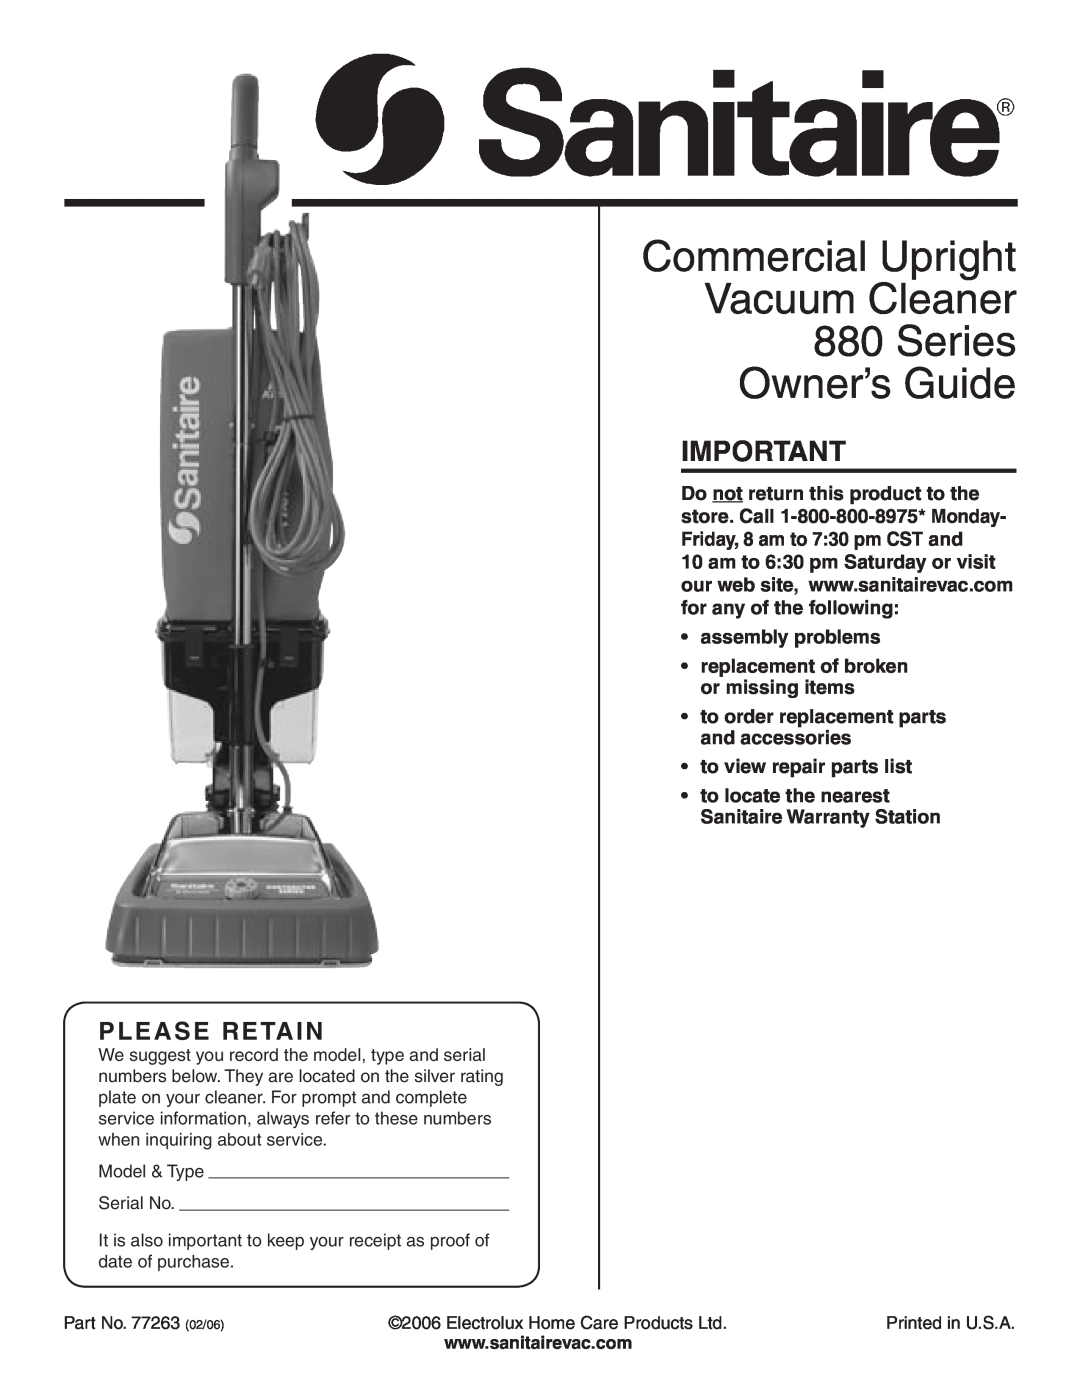 Sanitaire warranty Commercial Upright Vacuum Cleaner 880 Series Owner’s Guide, Please Retain 